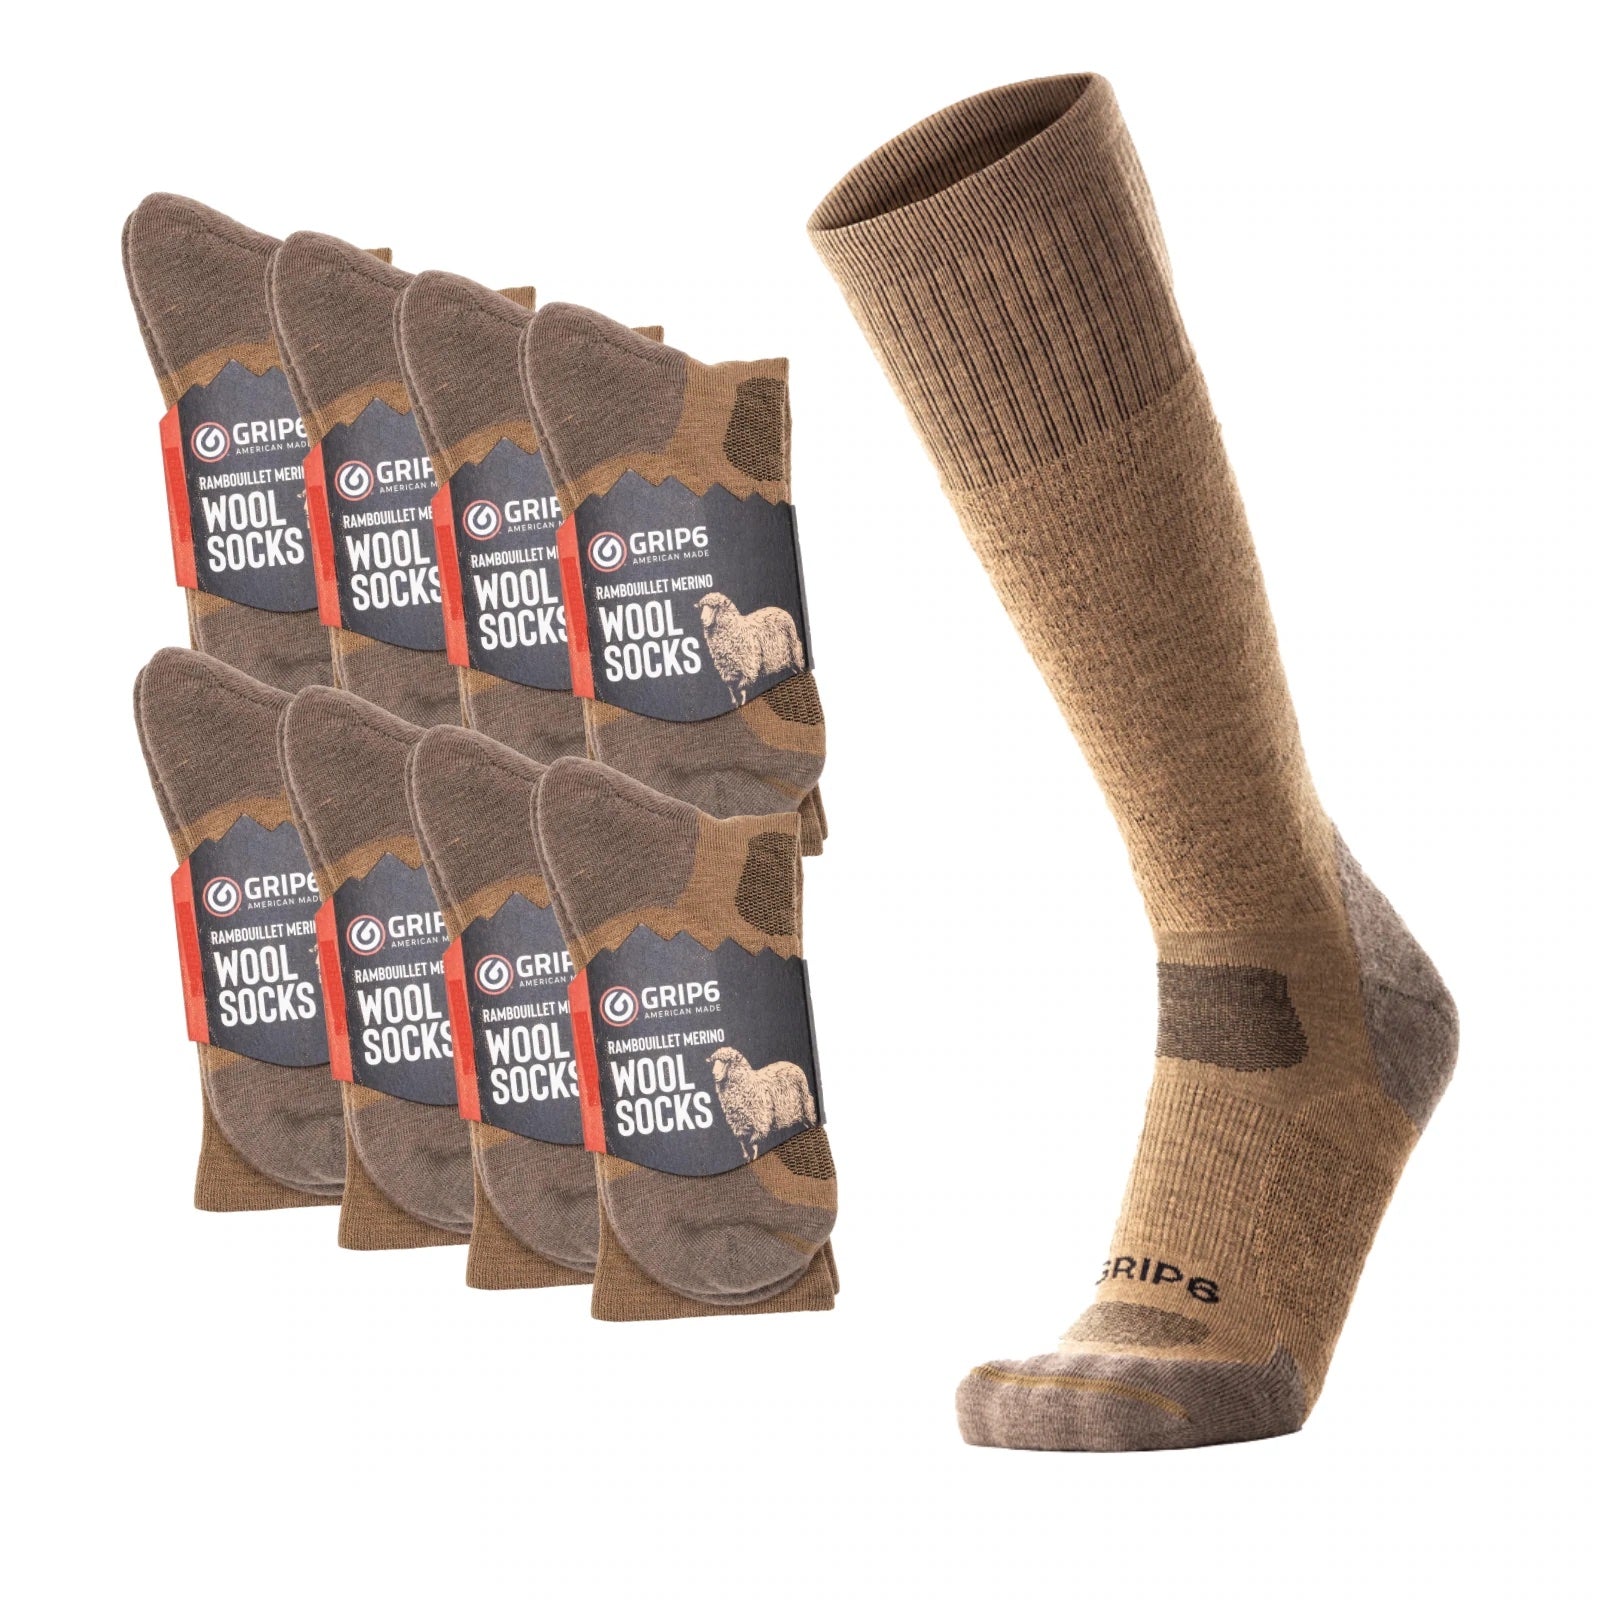 Grip6 Highline Merino Boot Sock - Coyote - 8 pack - Trusted Gear Company LLC